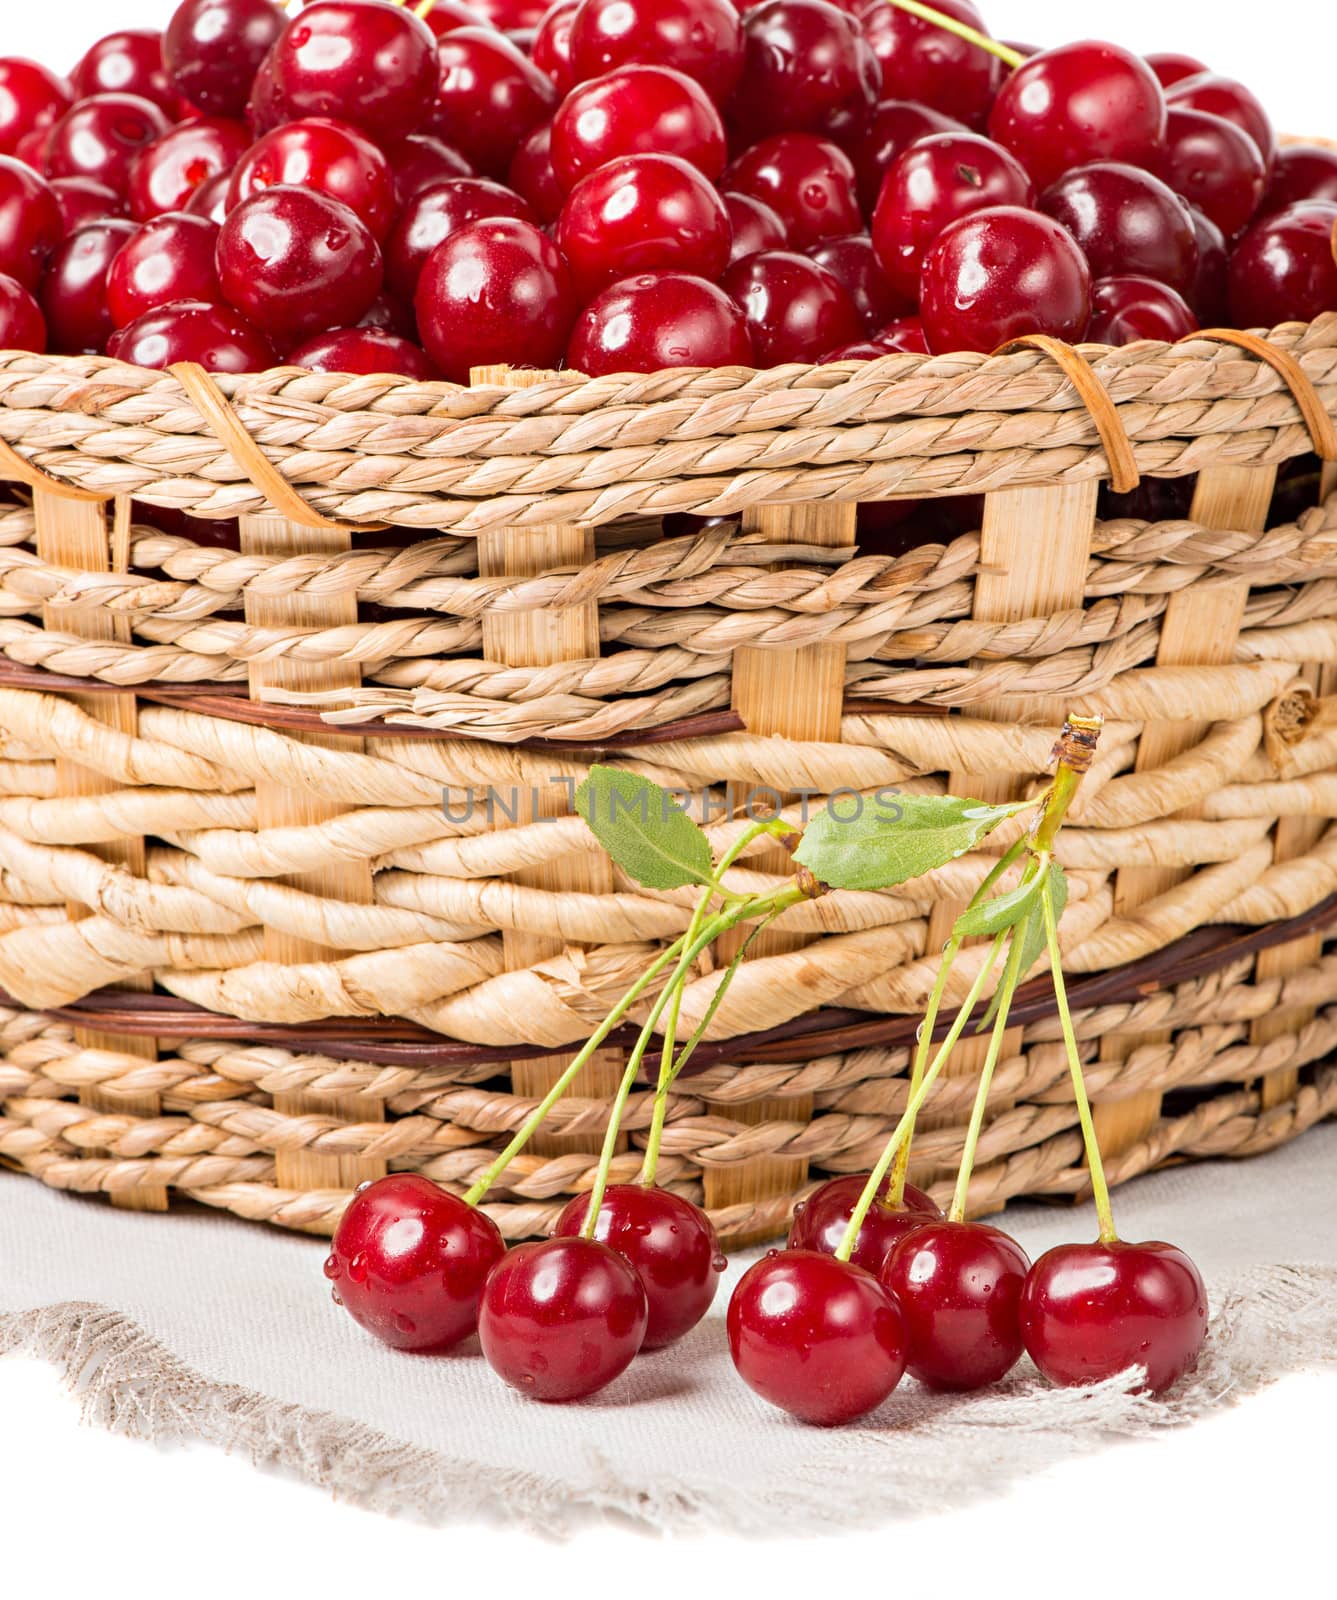 Sweet cherry in basket isolated on white background